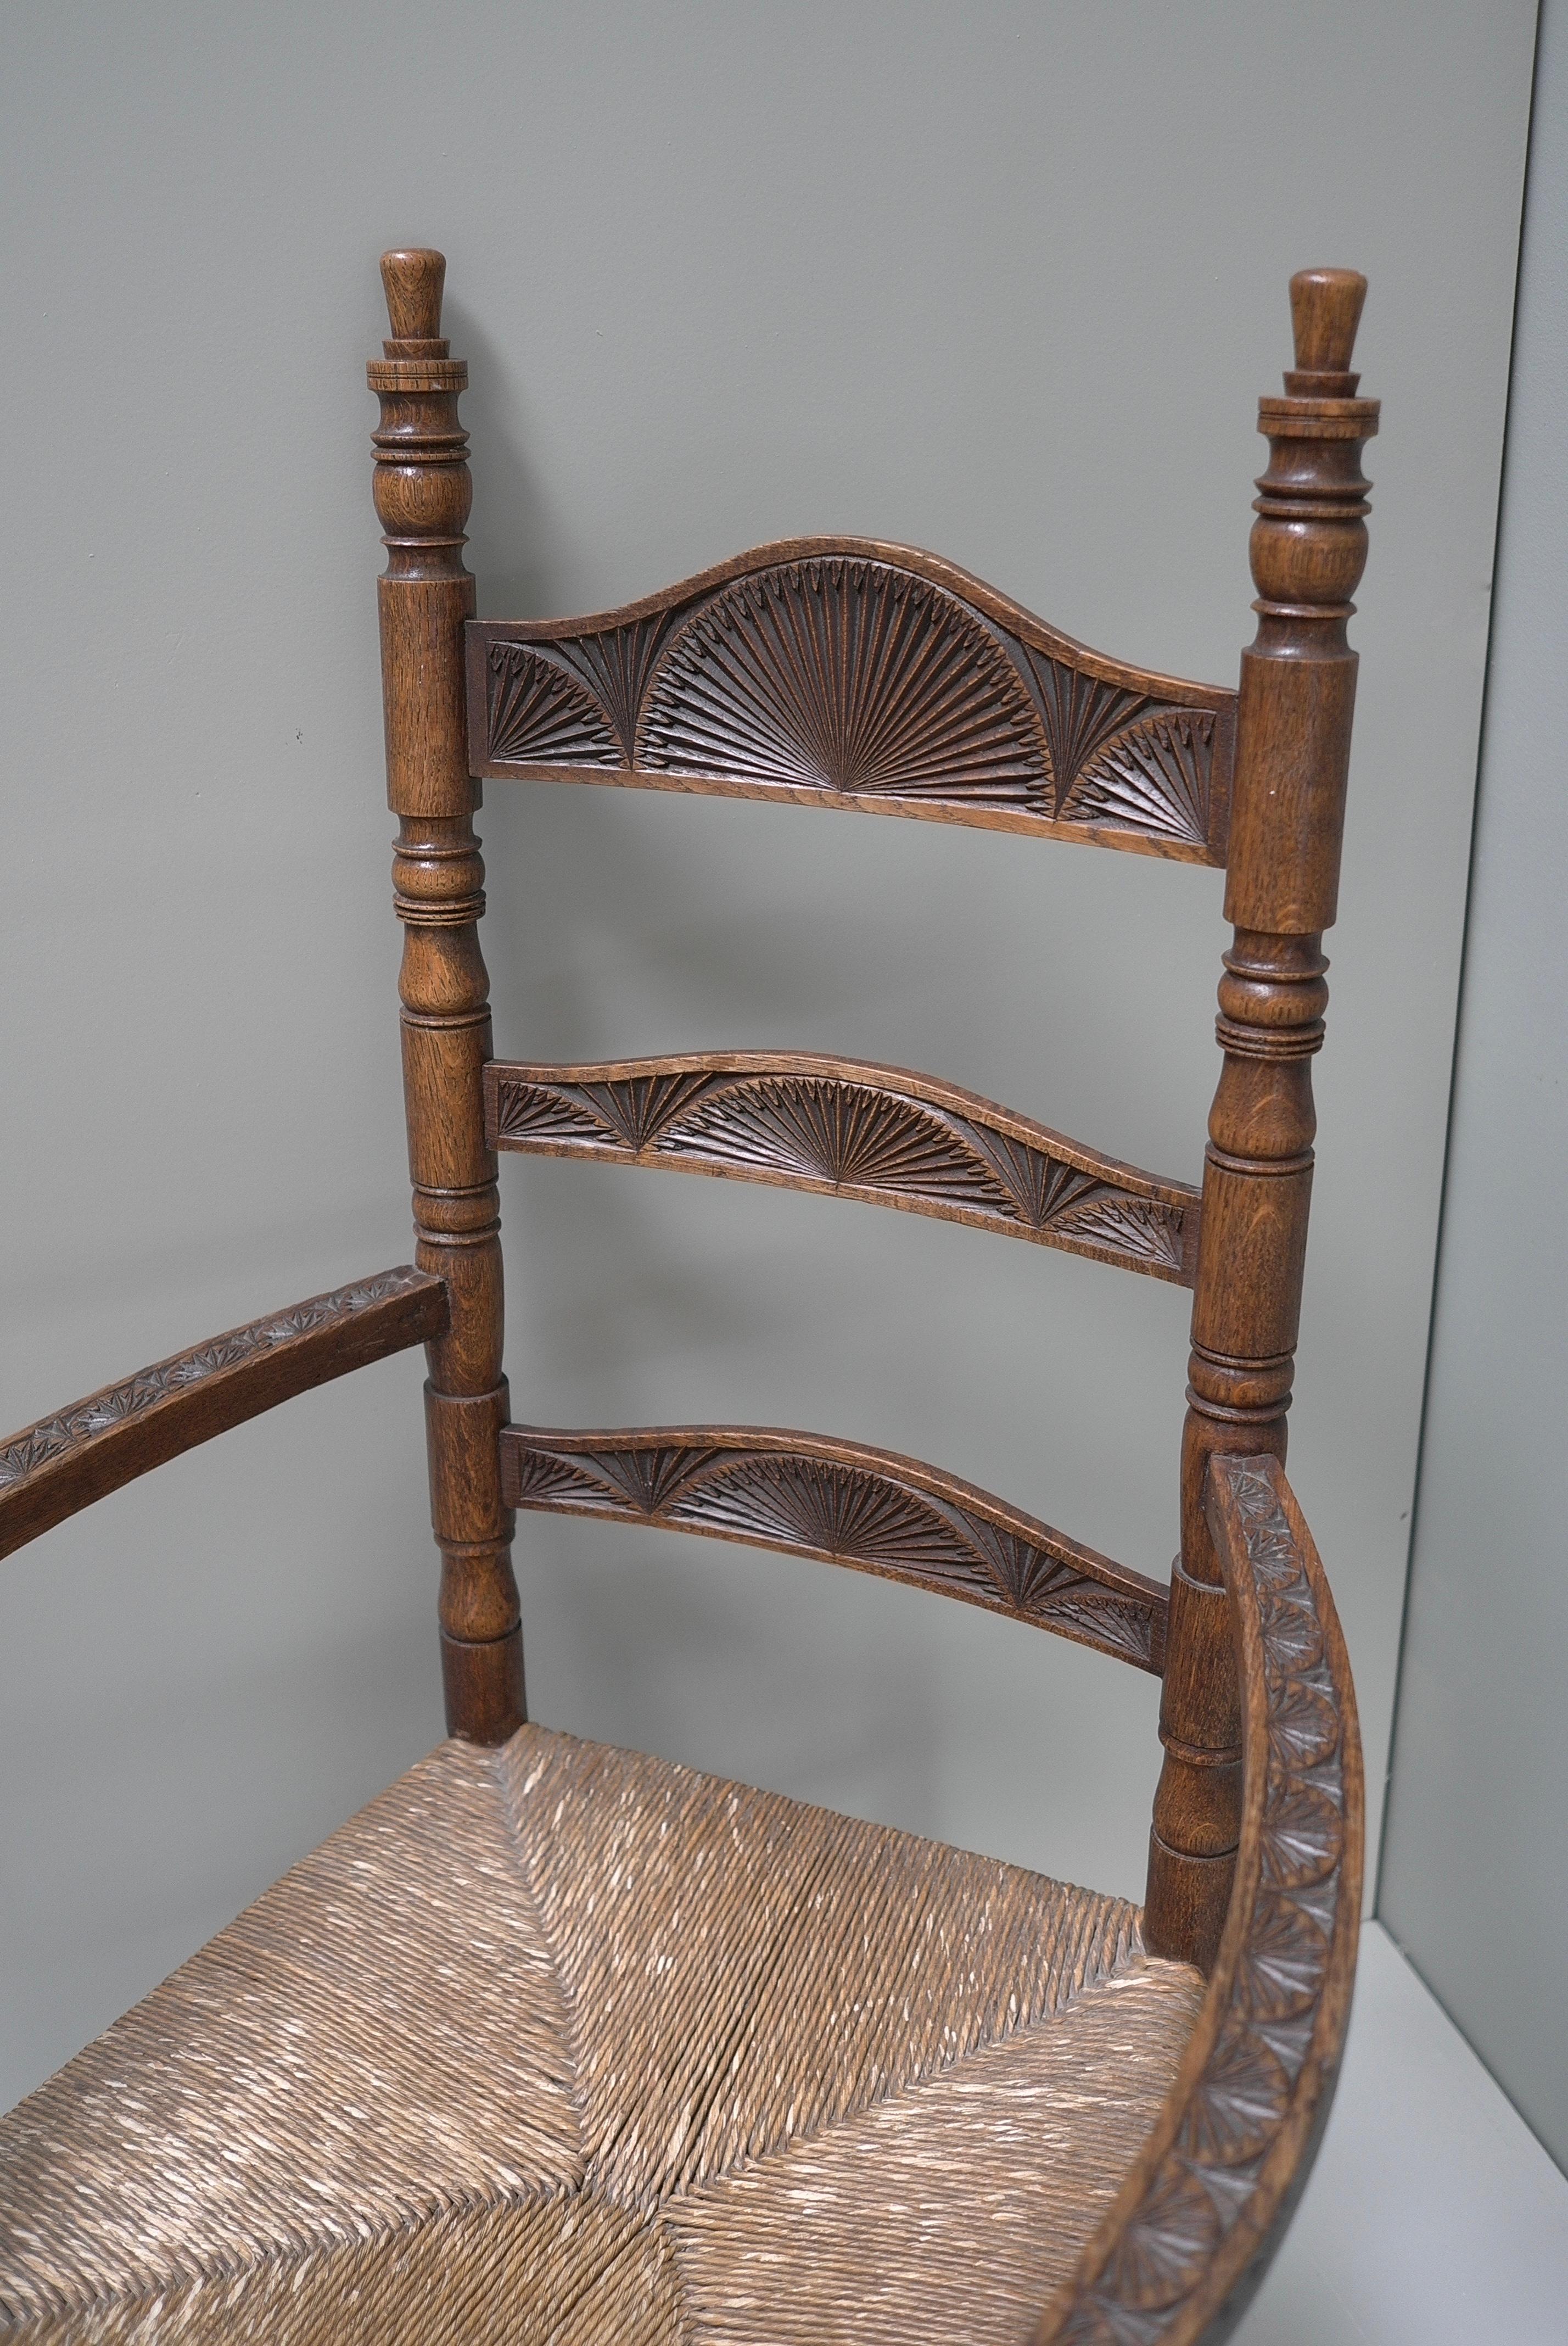 Richly decorated 'Old Dutch' Oak Hand-Carved Knob chair, based on the seventeenth-century shape, ca. 1910-1940.

The Knob Chair with a rush seat is an Dutch archetype. This chair appeared in many Dutch households from the 17th century and well into